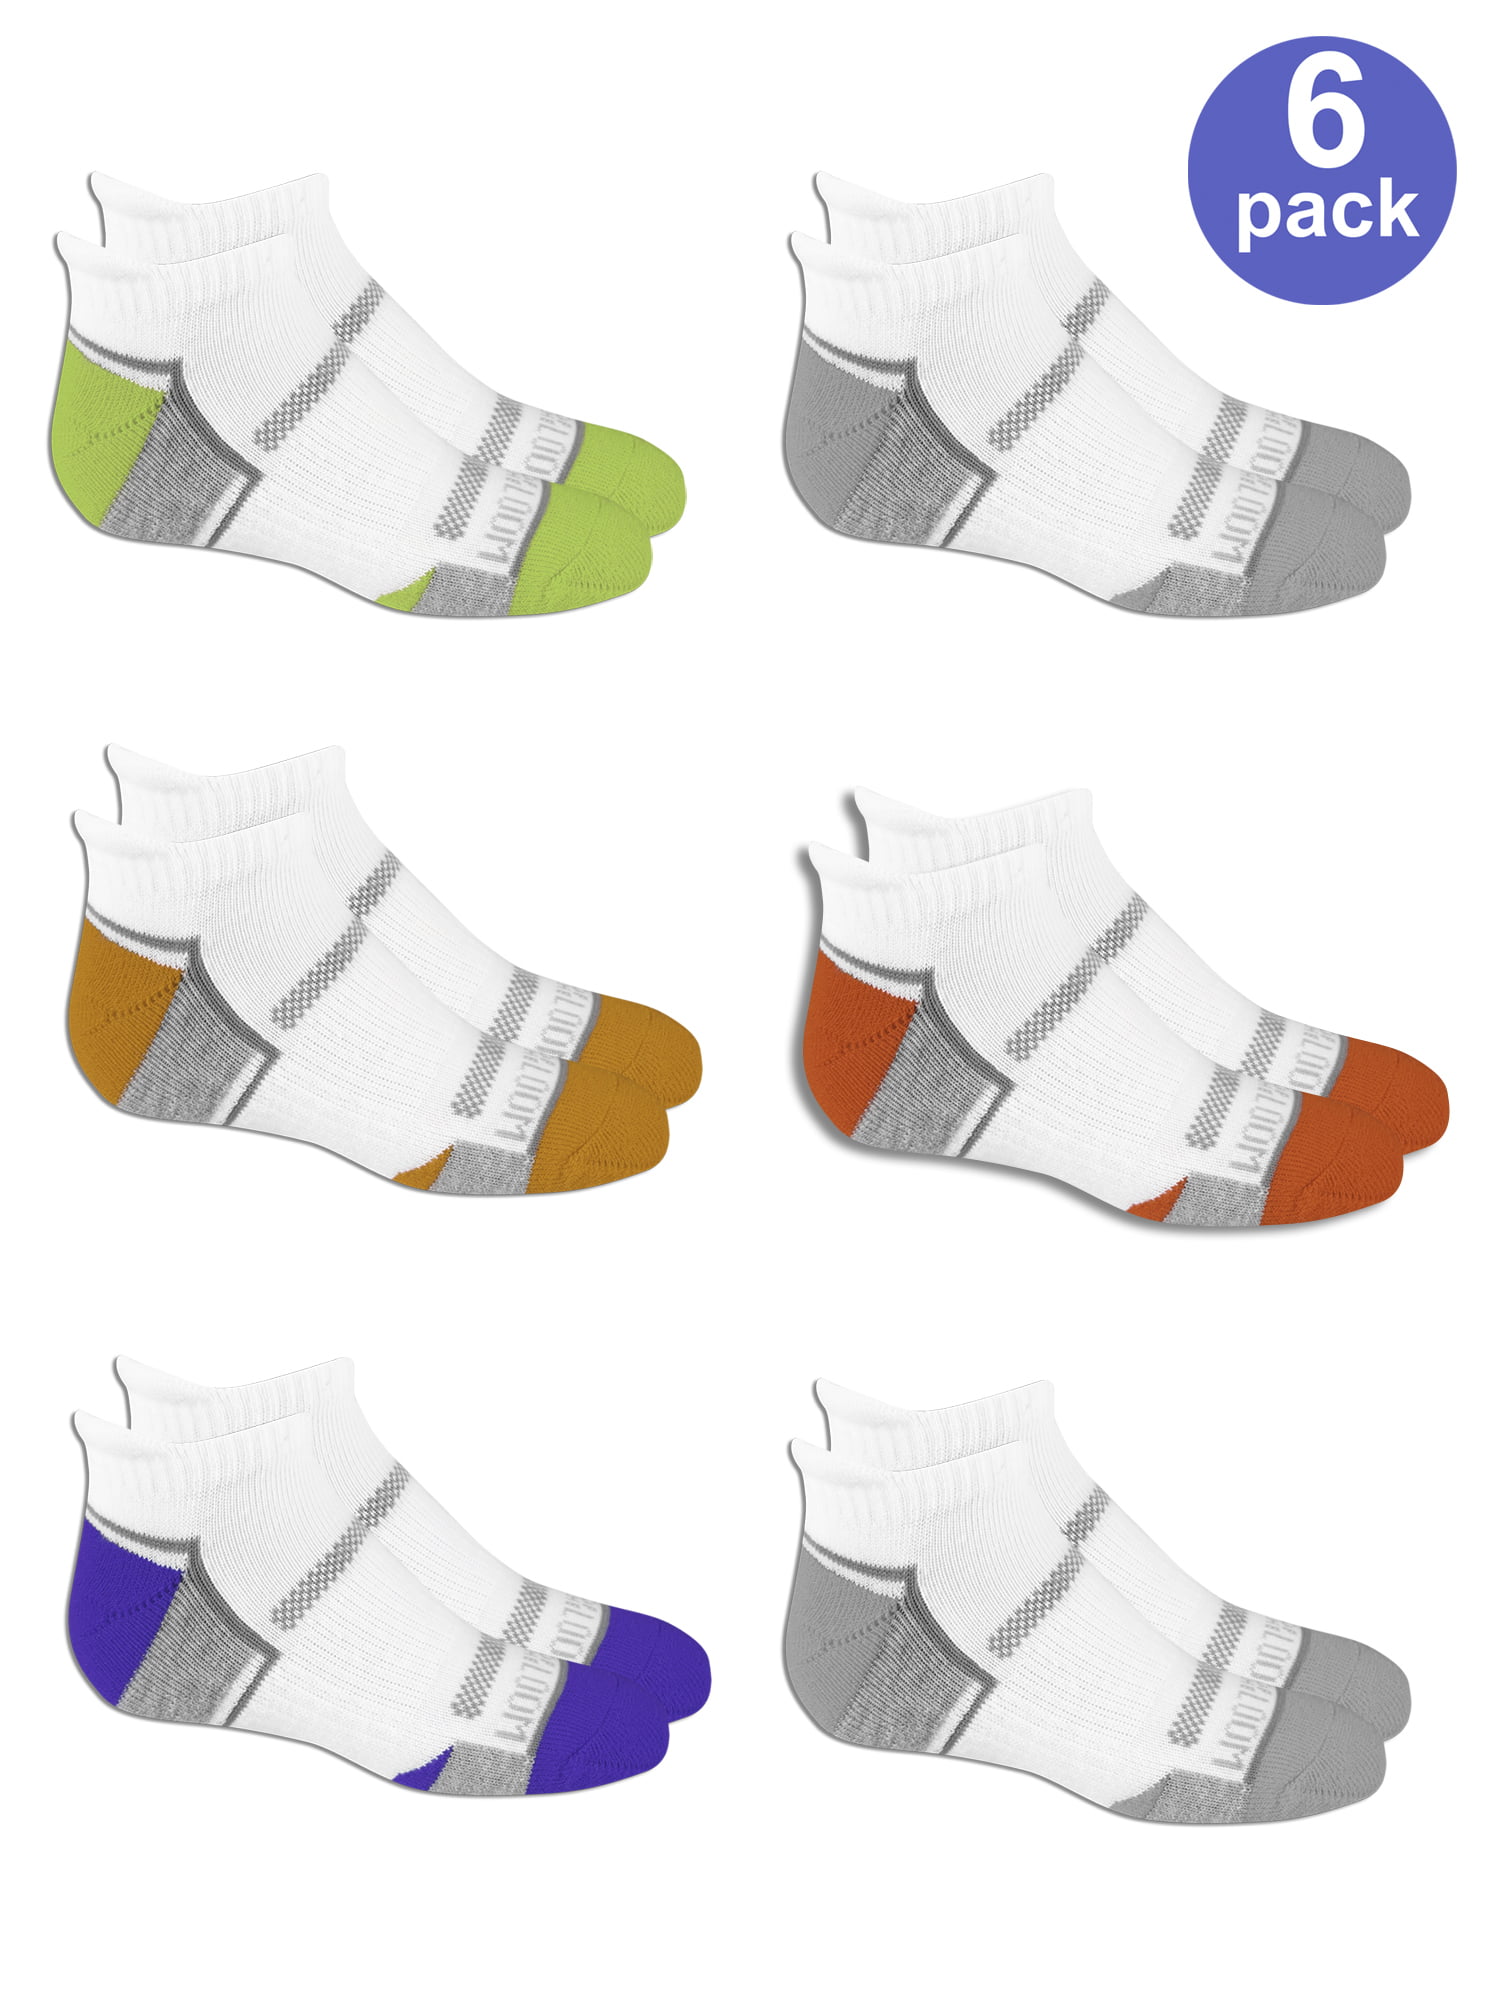 Fruit of the Loom Boys Active Ankle Socks 6 Pair Pack